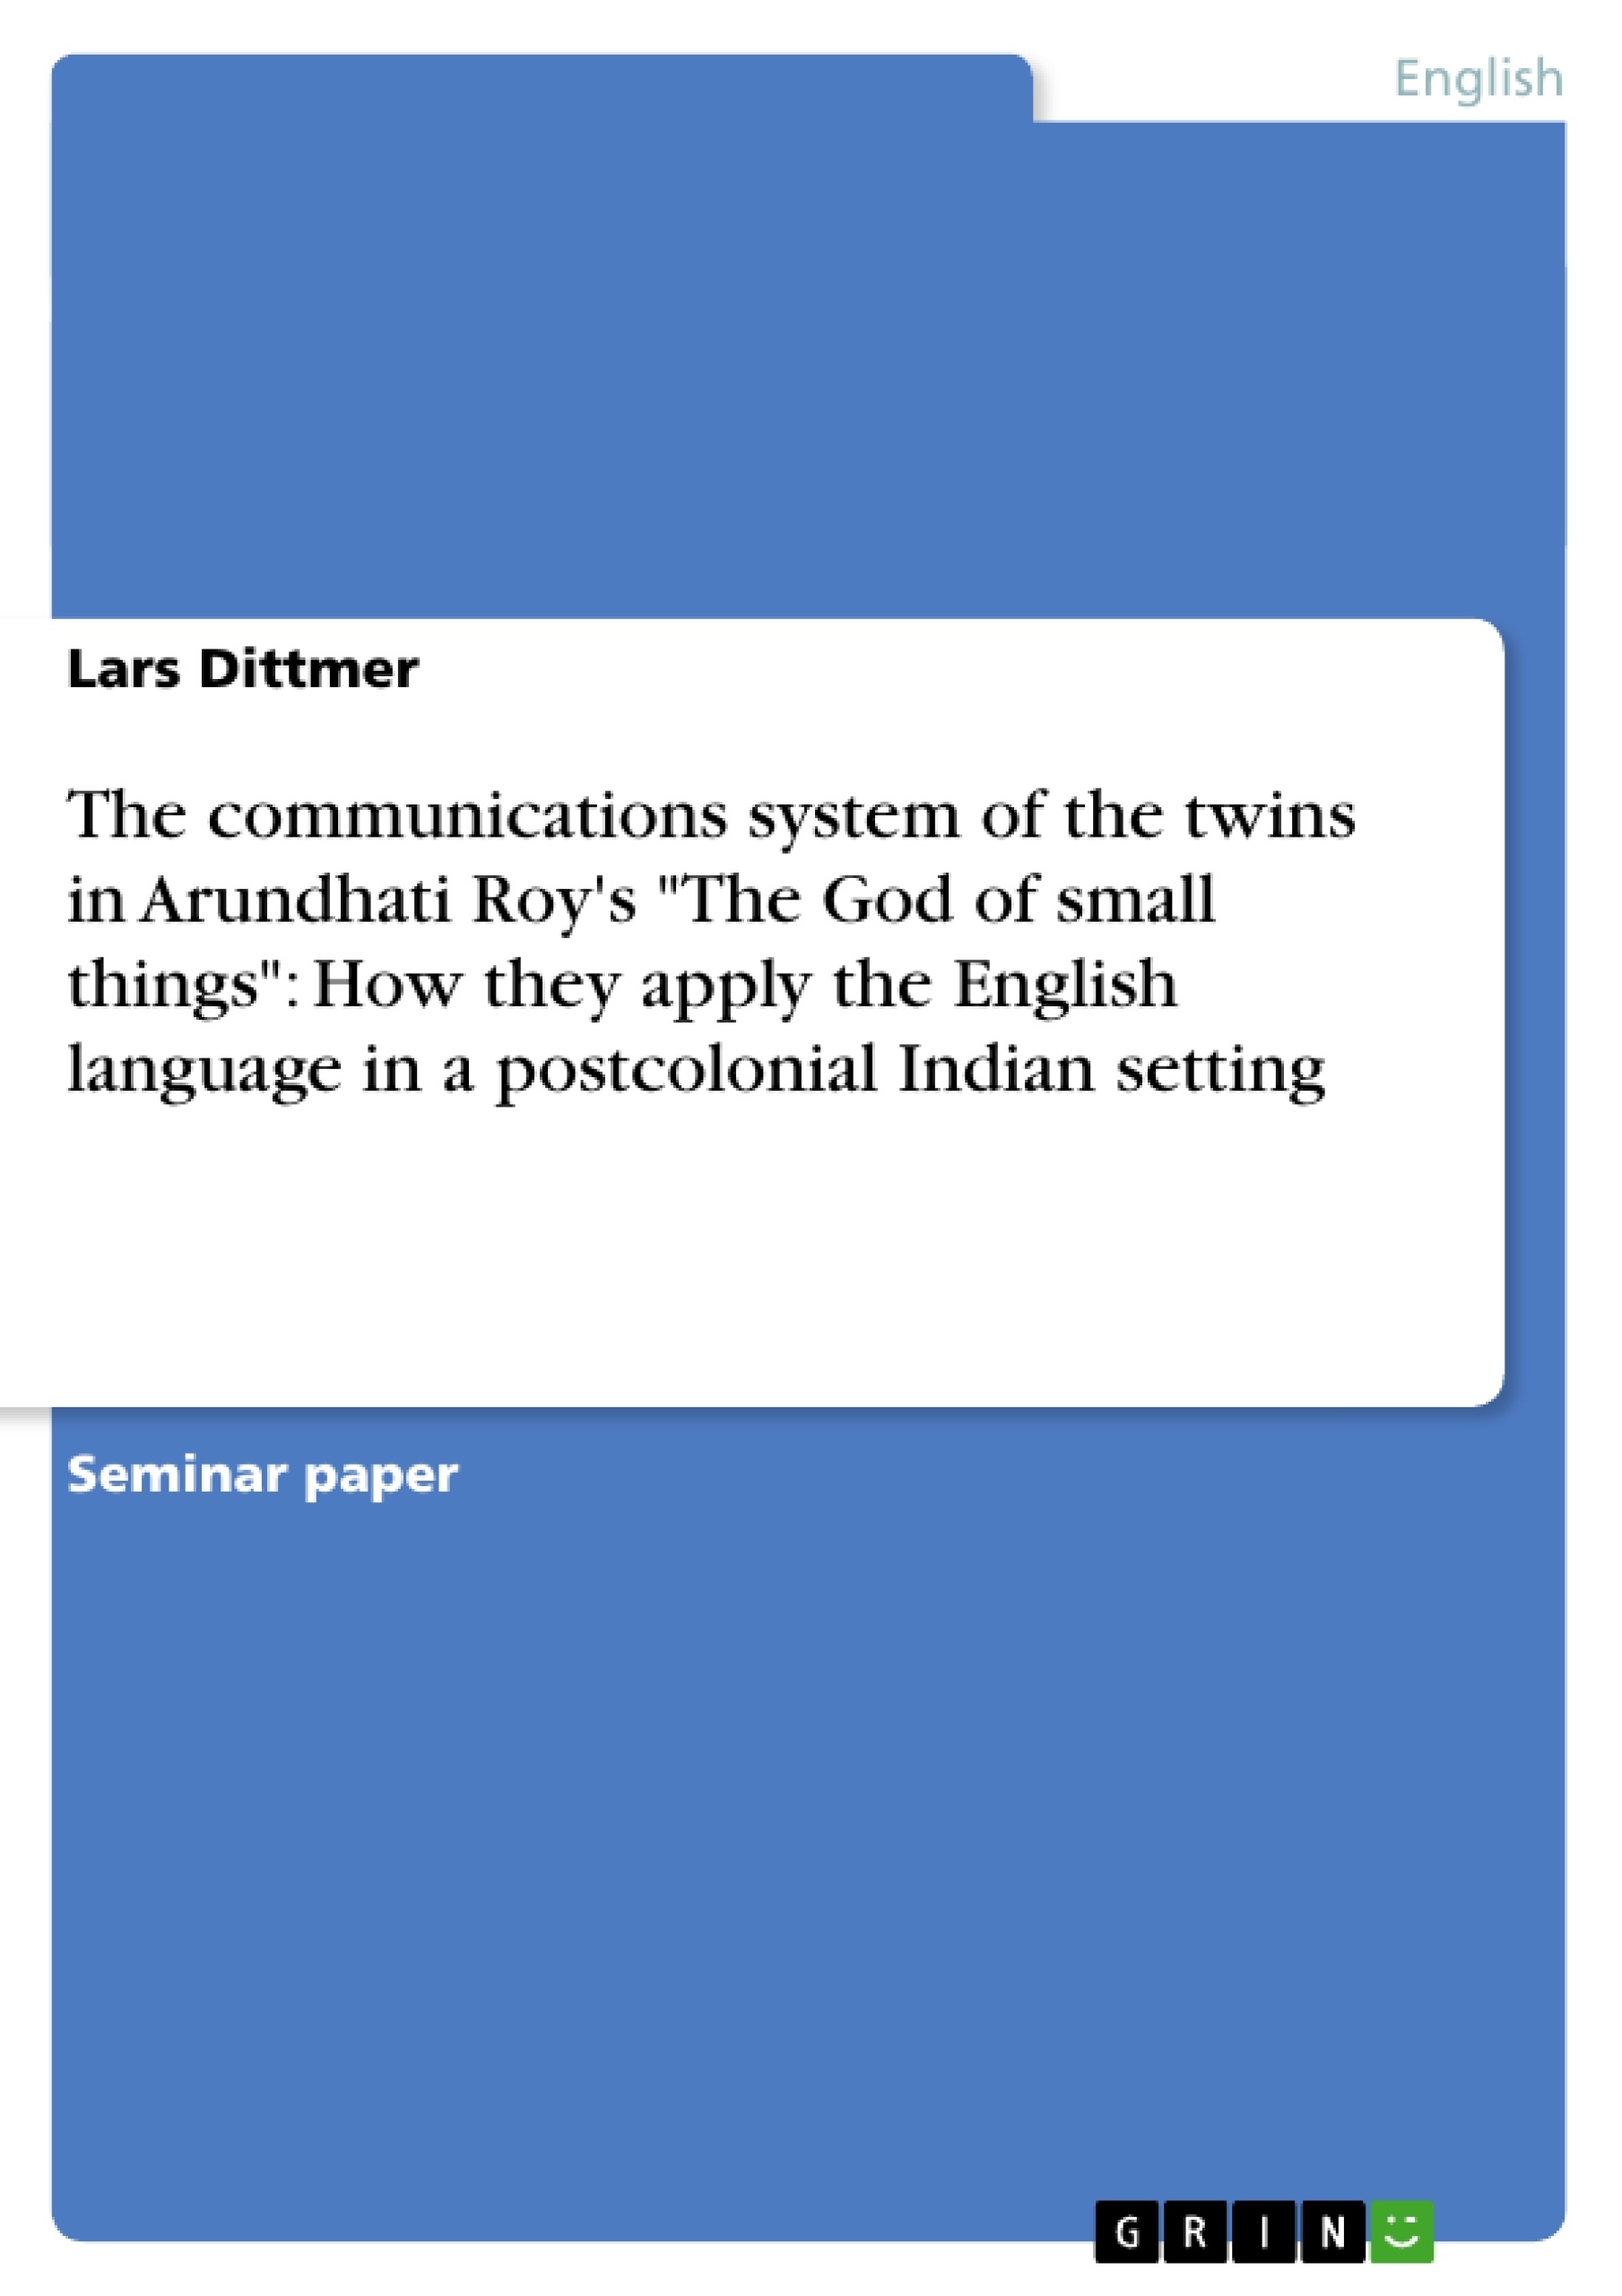 Title: The communications system of the twins in Arundhati Roy's "The God of small things": How they apply the English language in a postcolonial Indian setting